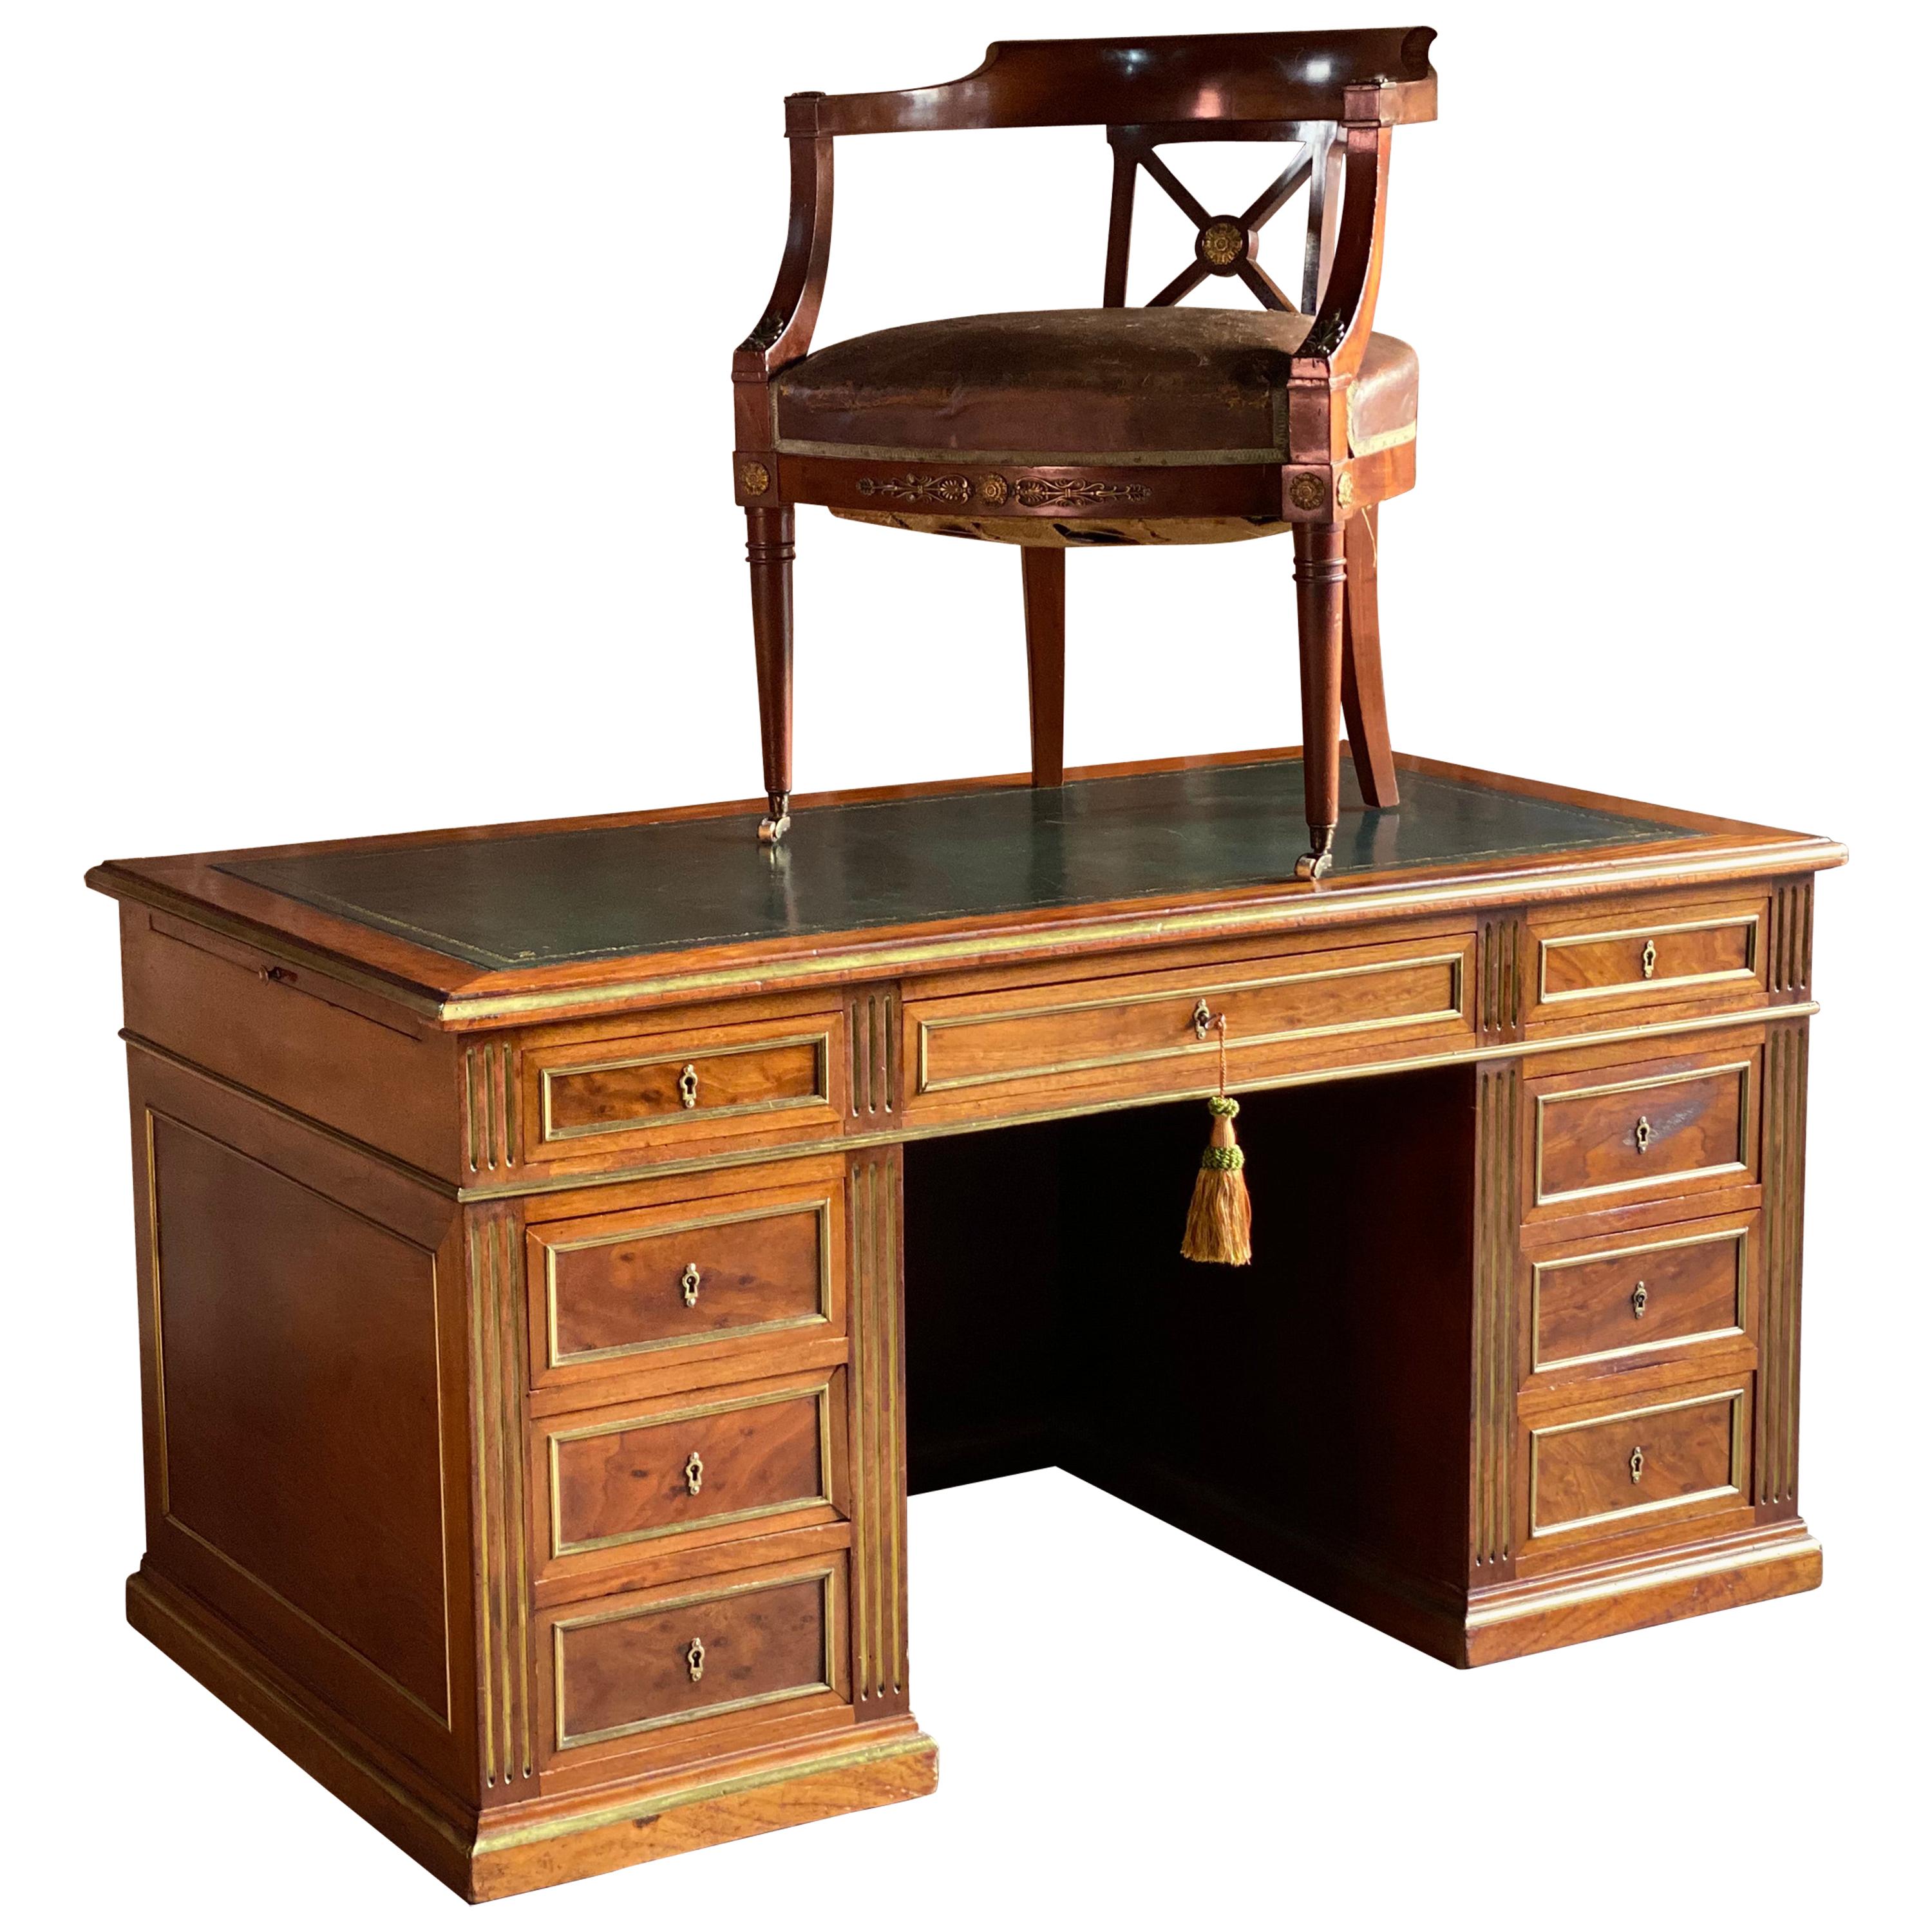 French Napoleon III Brass Mounted Plum Pudding Desk and Chair, circa 1890